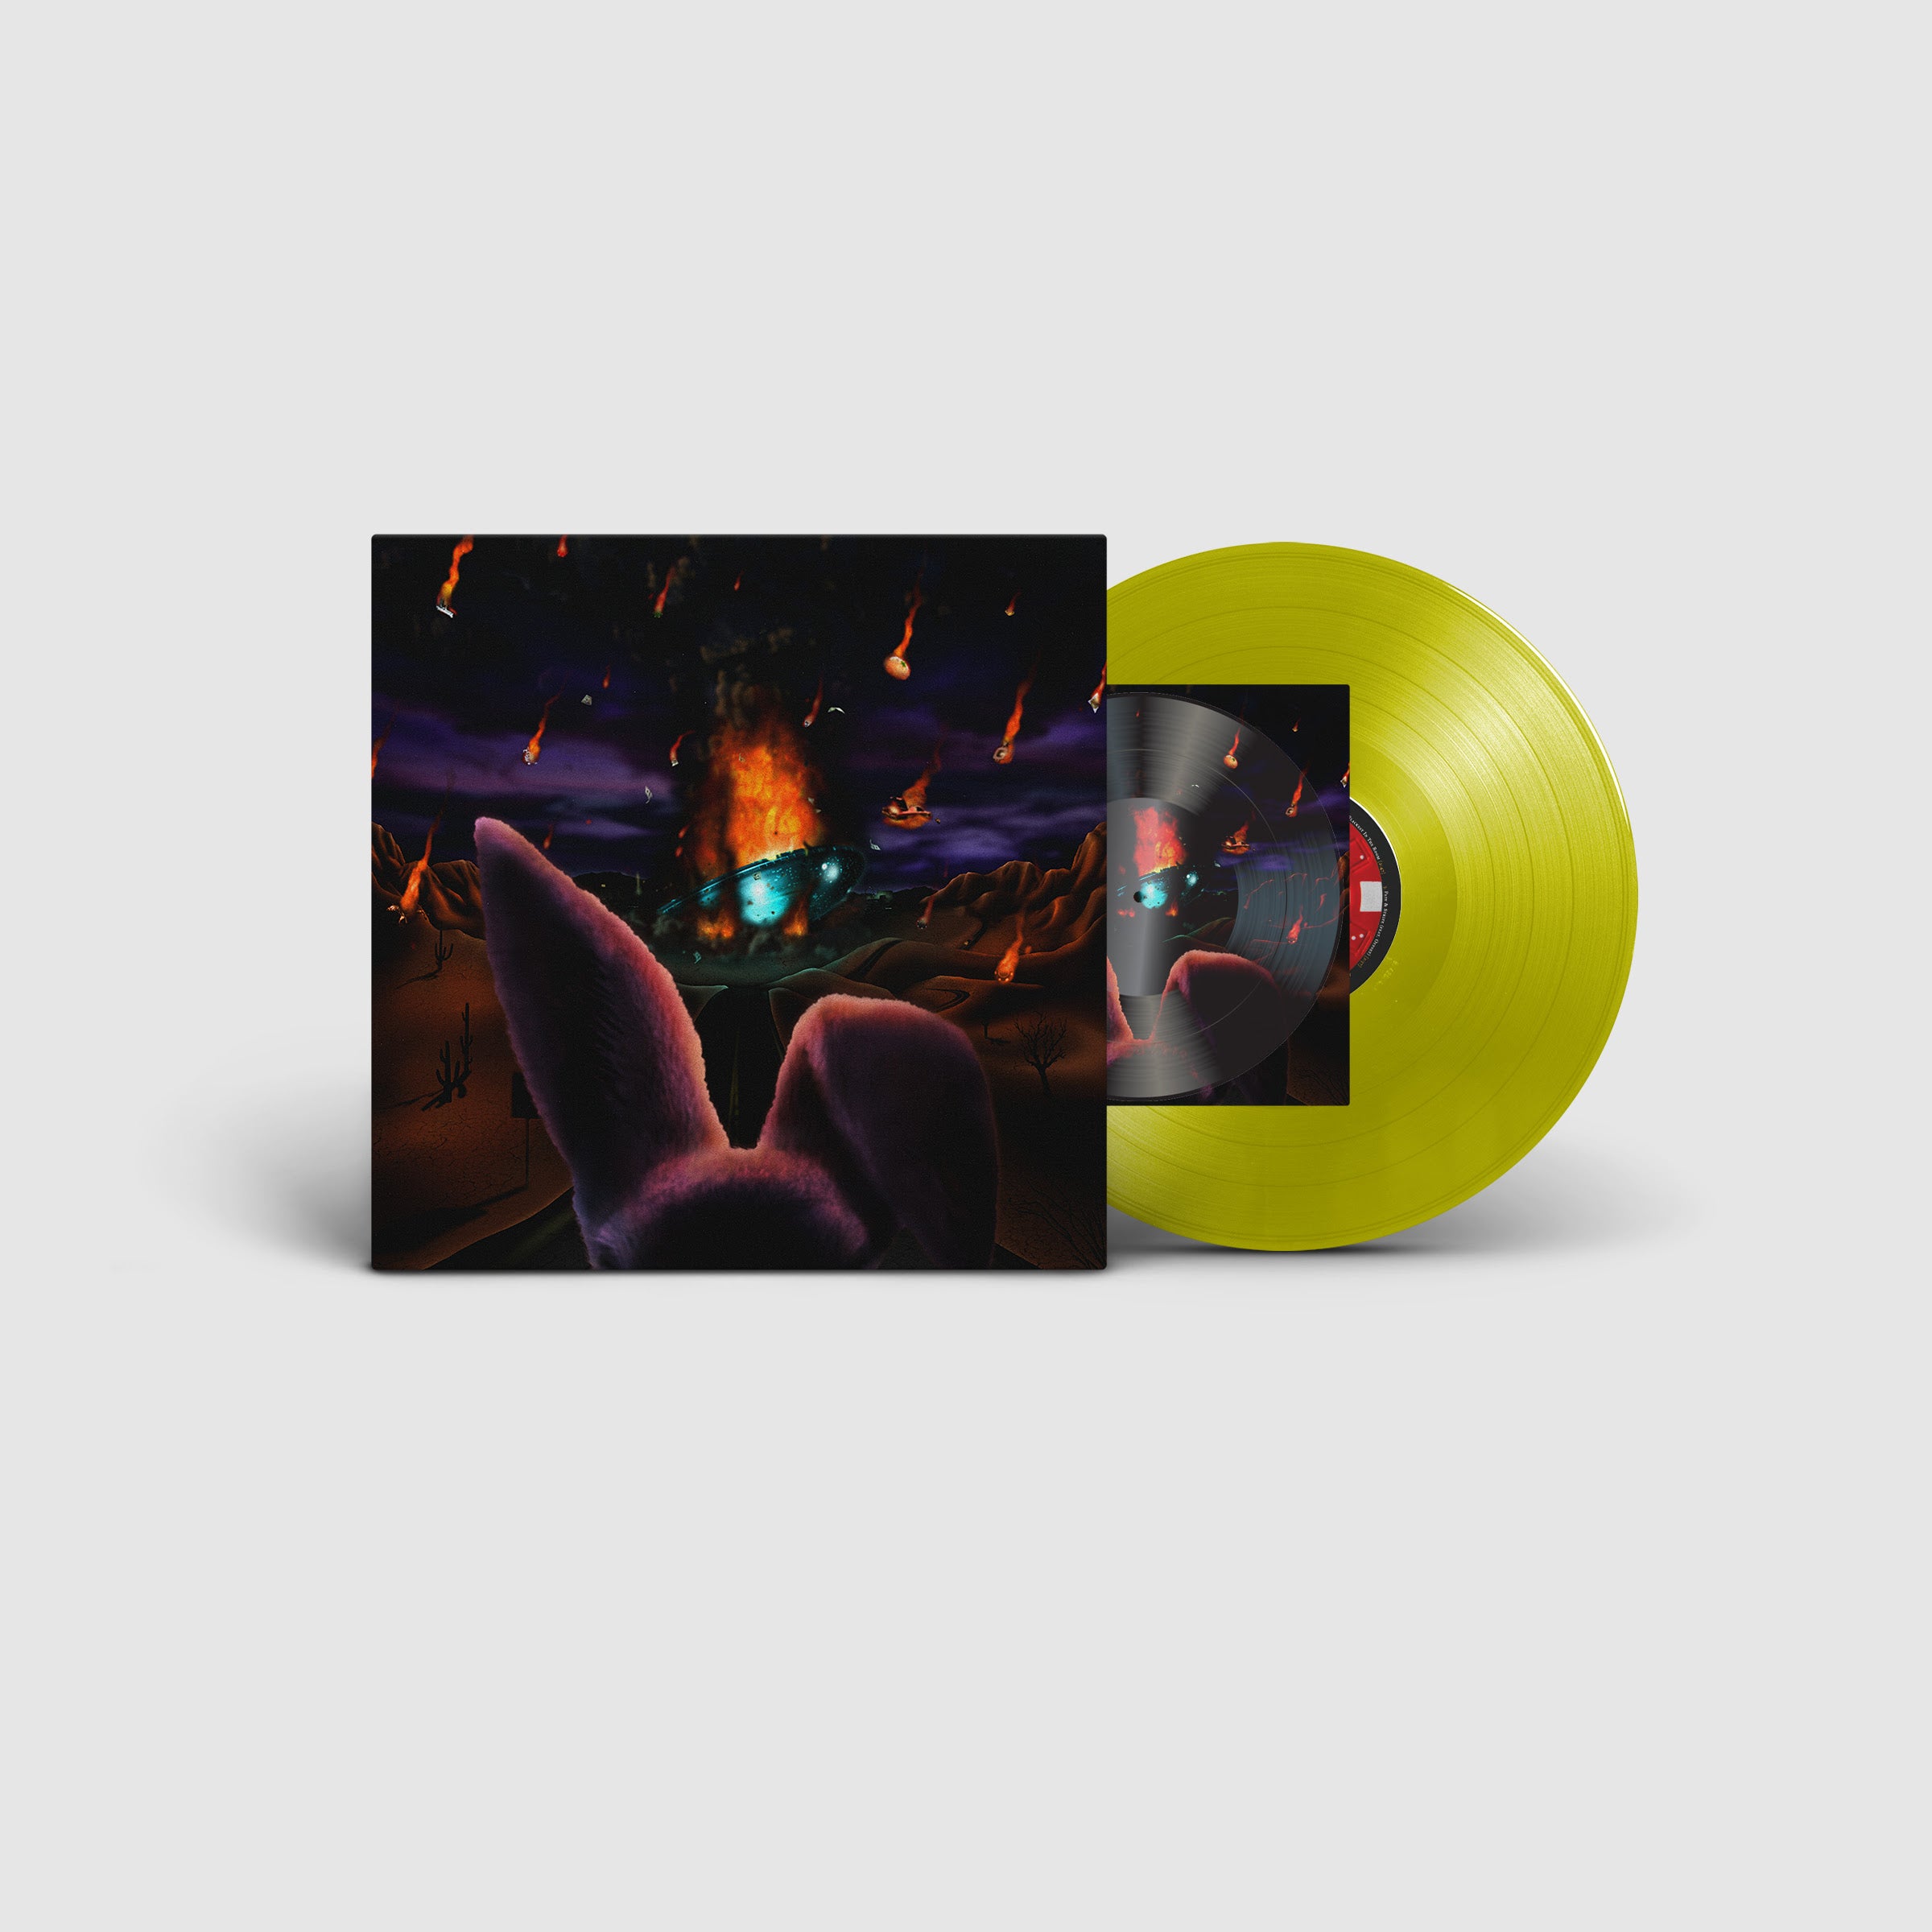 Freddie Gibbs | $oul $old $eparately (Indie Exclusive, Neon Yellow, includes flexi disc with one extra track) | Vinyl